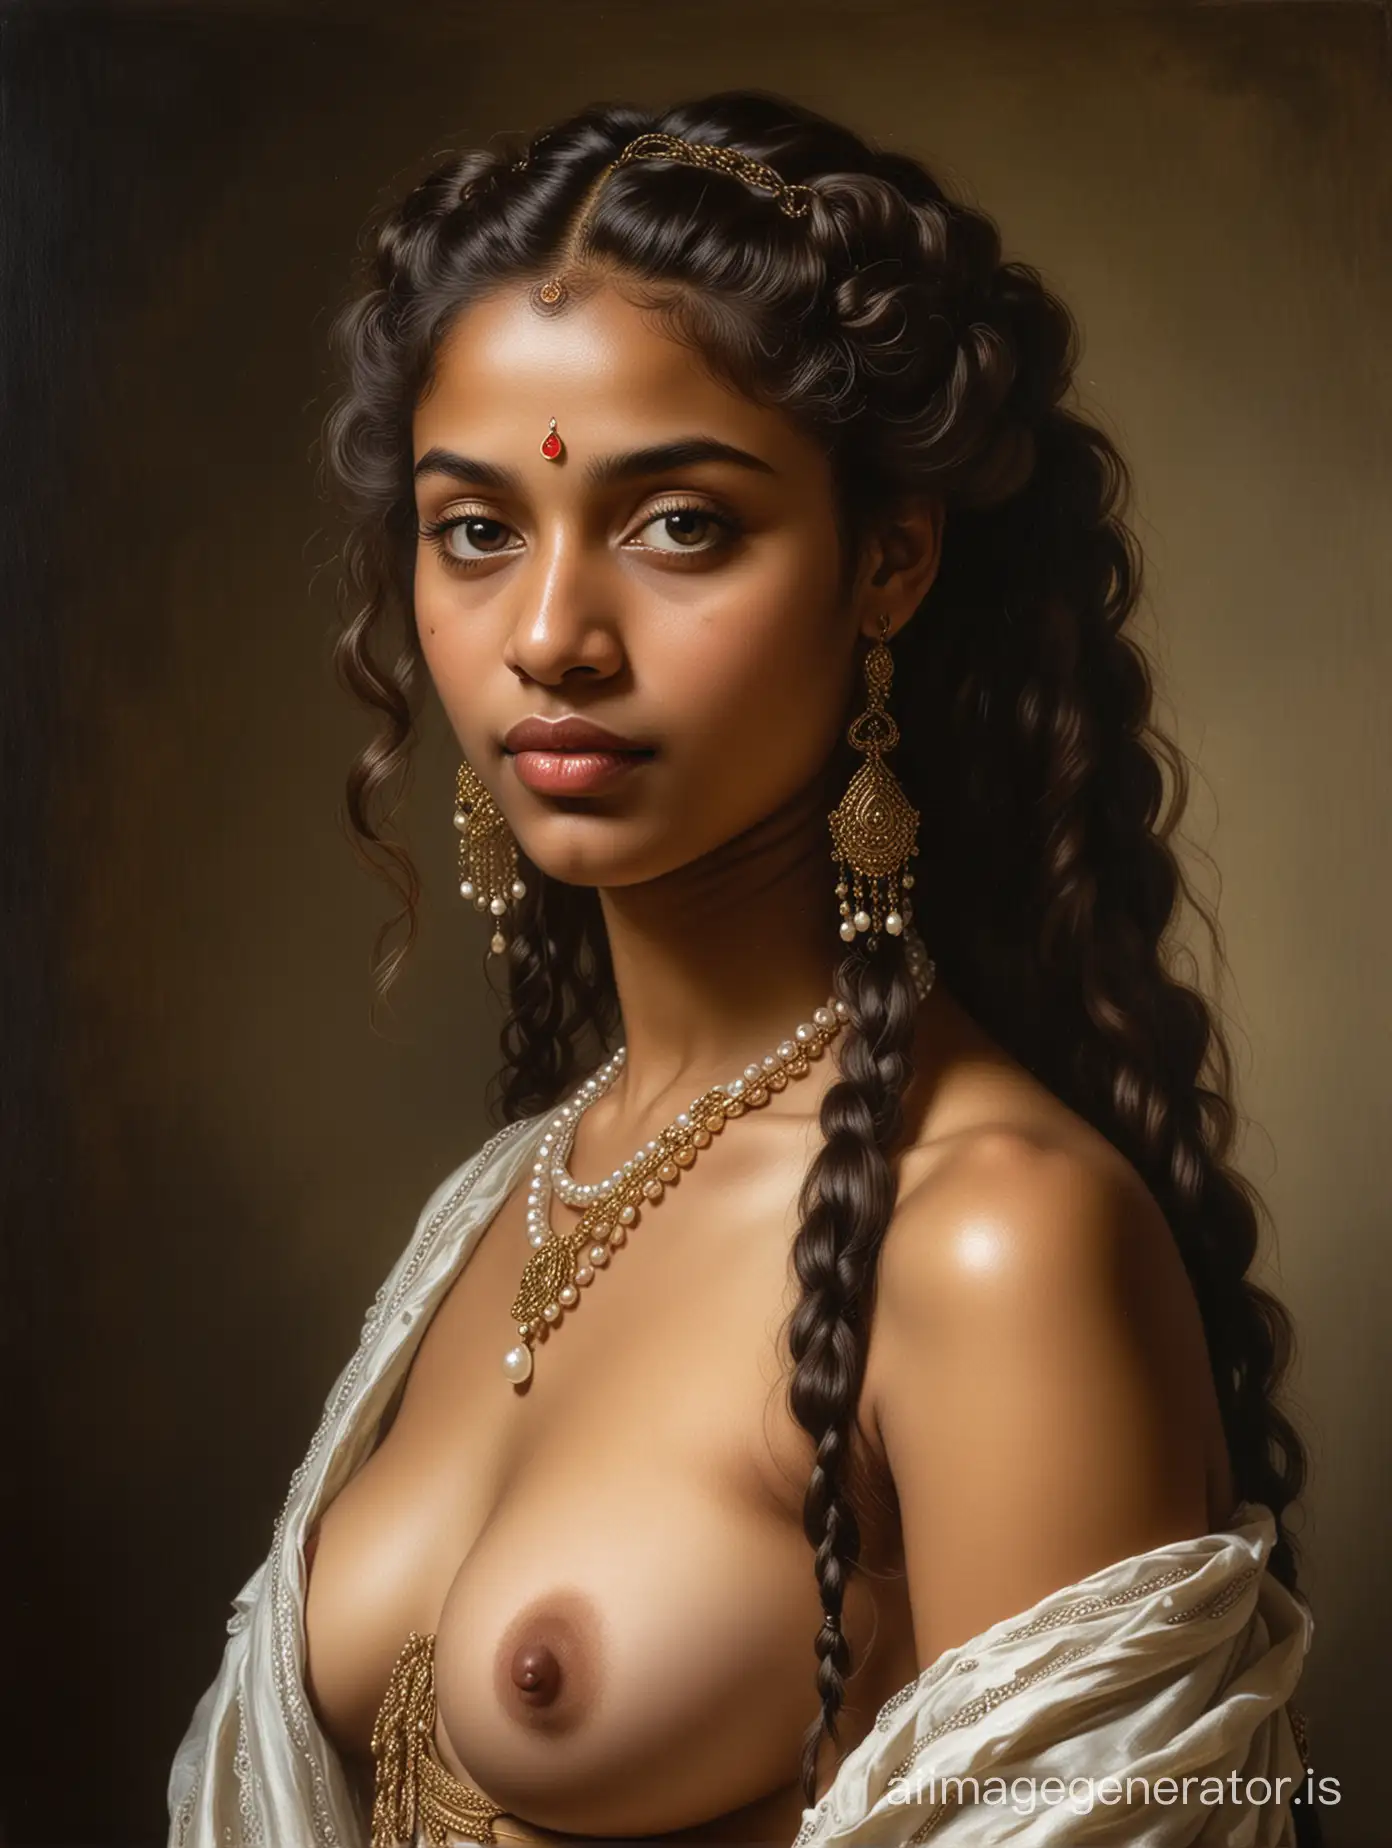 Rembrandt-Oil-Painting-of-Exquisite-Nude-Tamil-Princess-with-Braided-Hair-and-Pearls